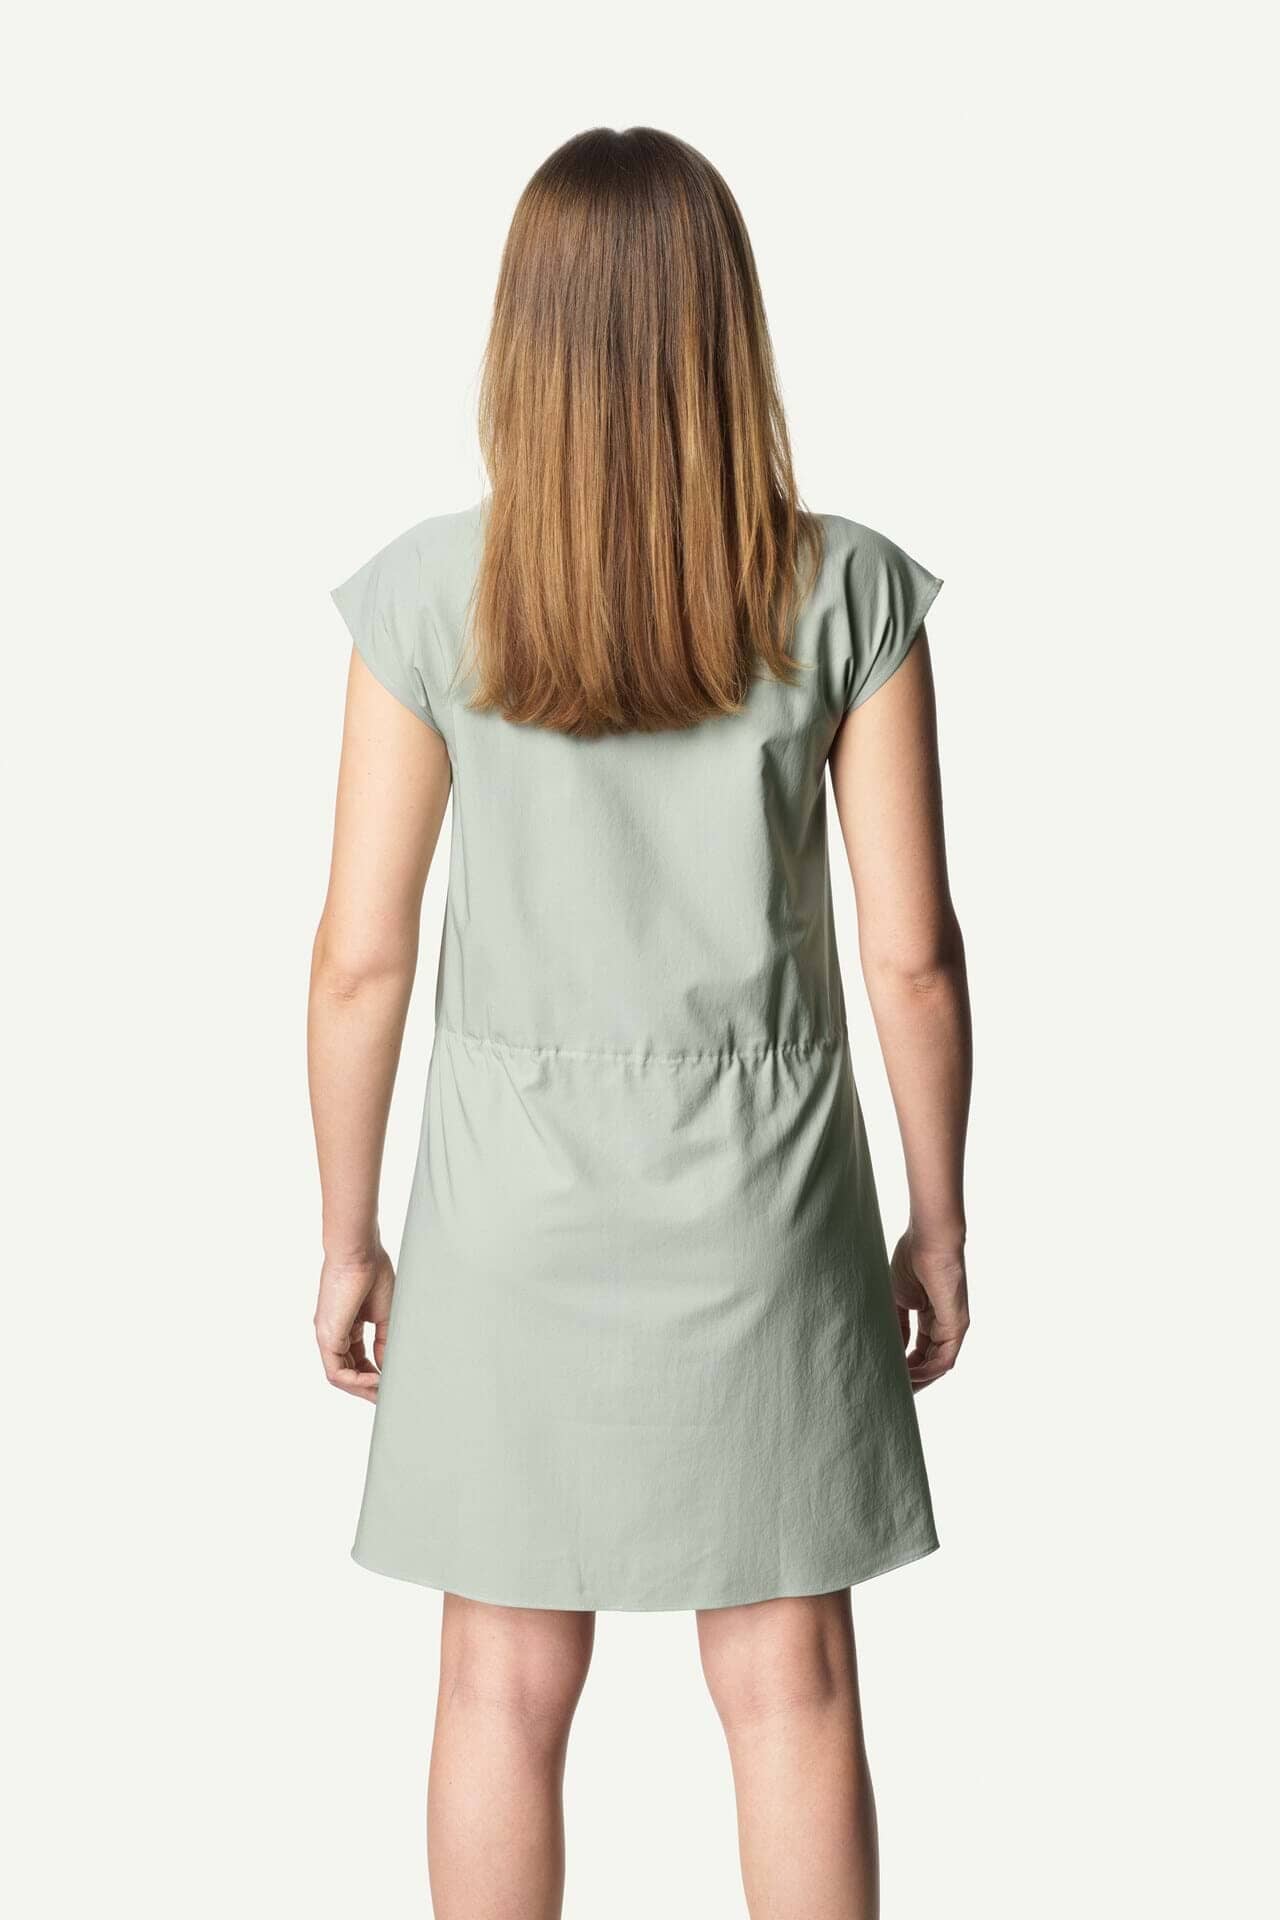 Houdini W's Dawn Dress - Recycled Polyester Frost Green Dress